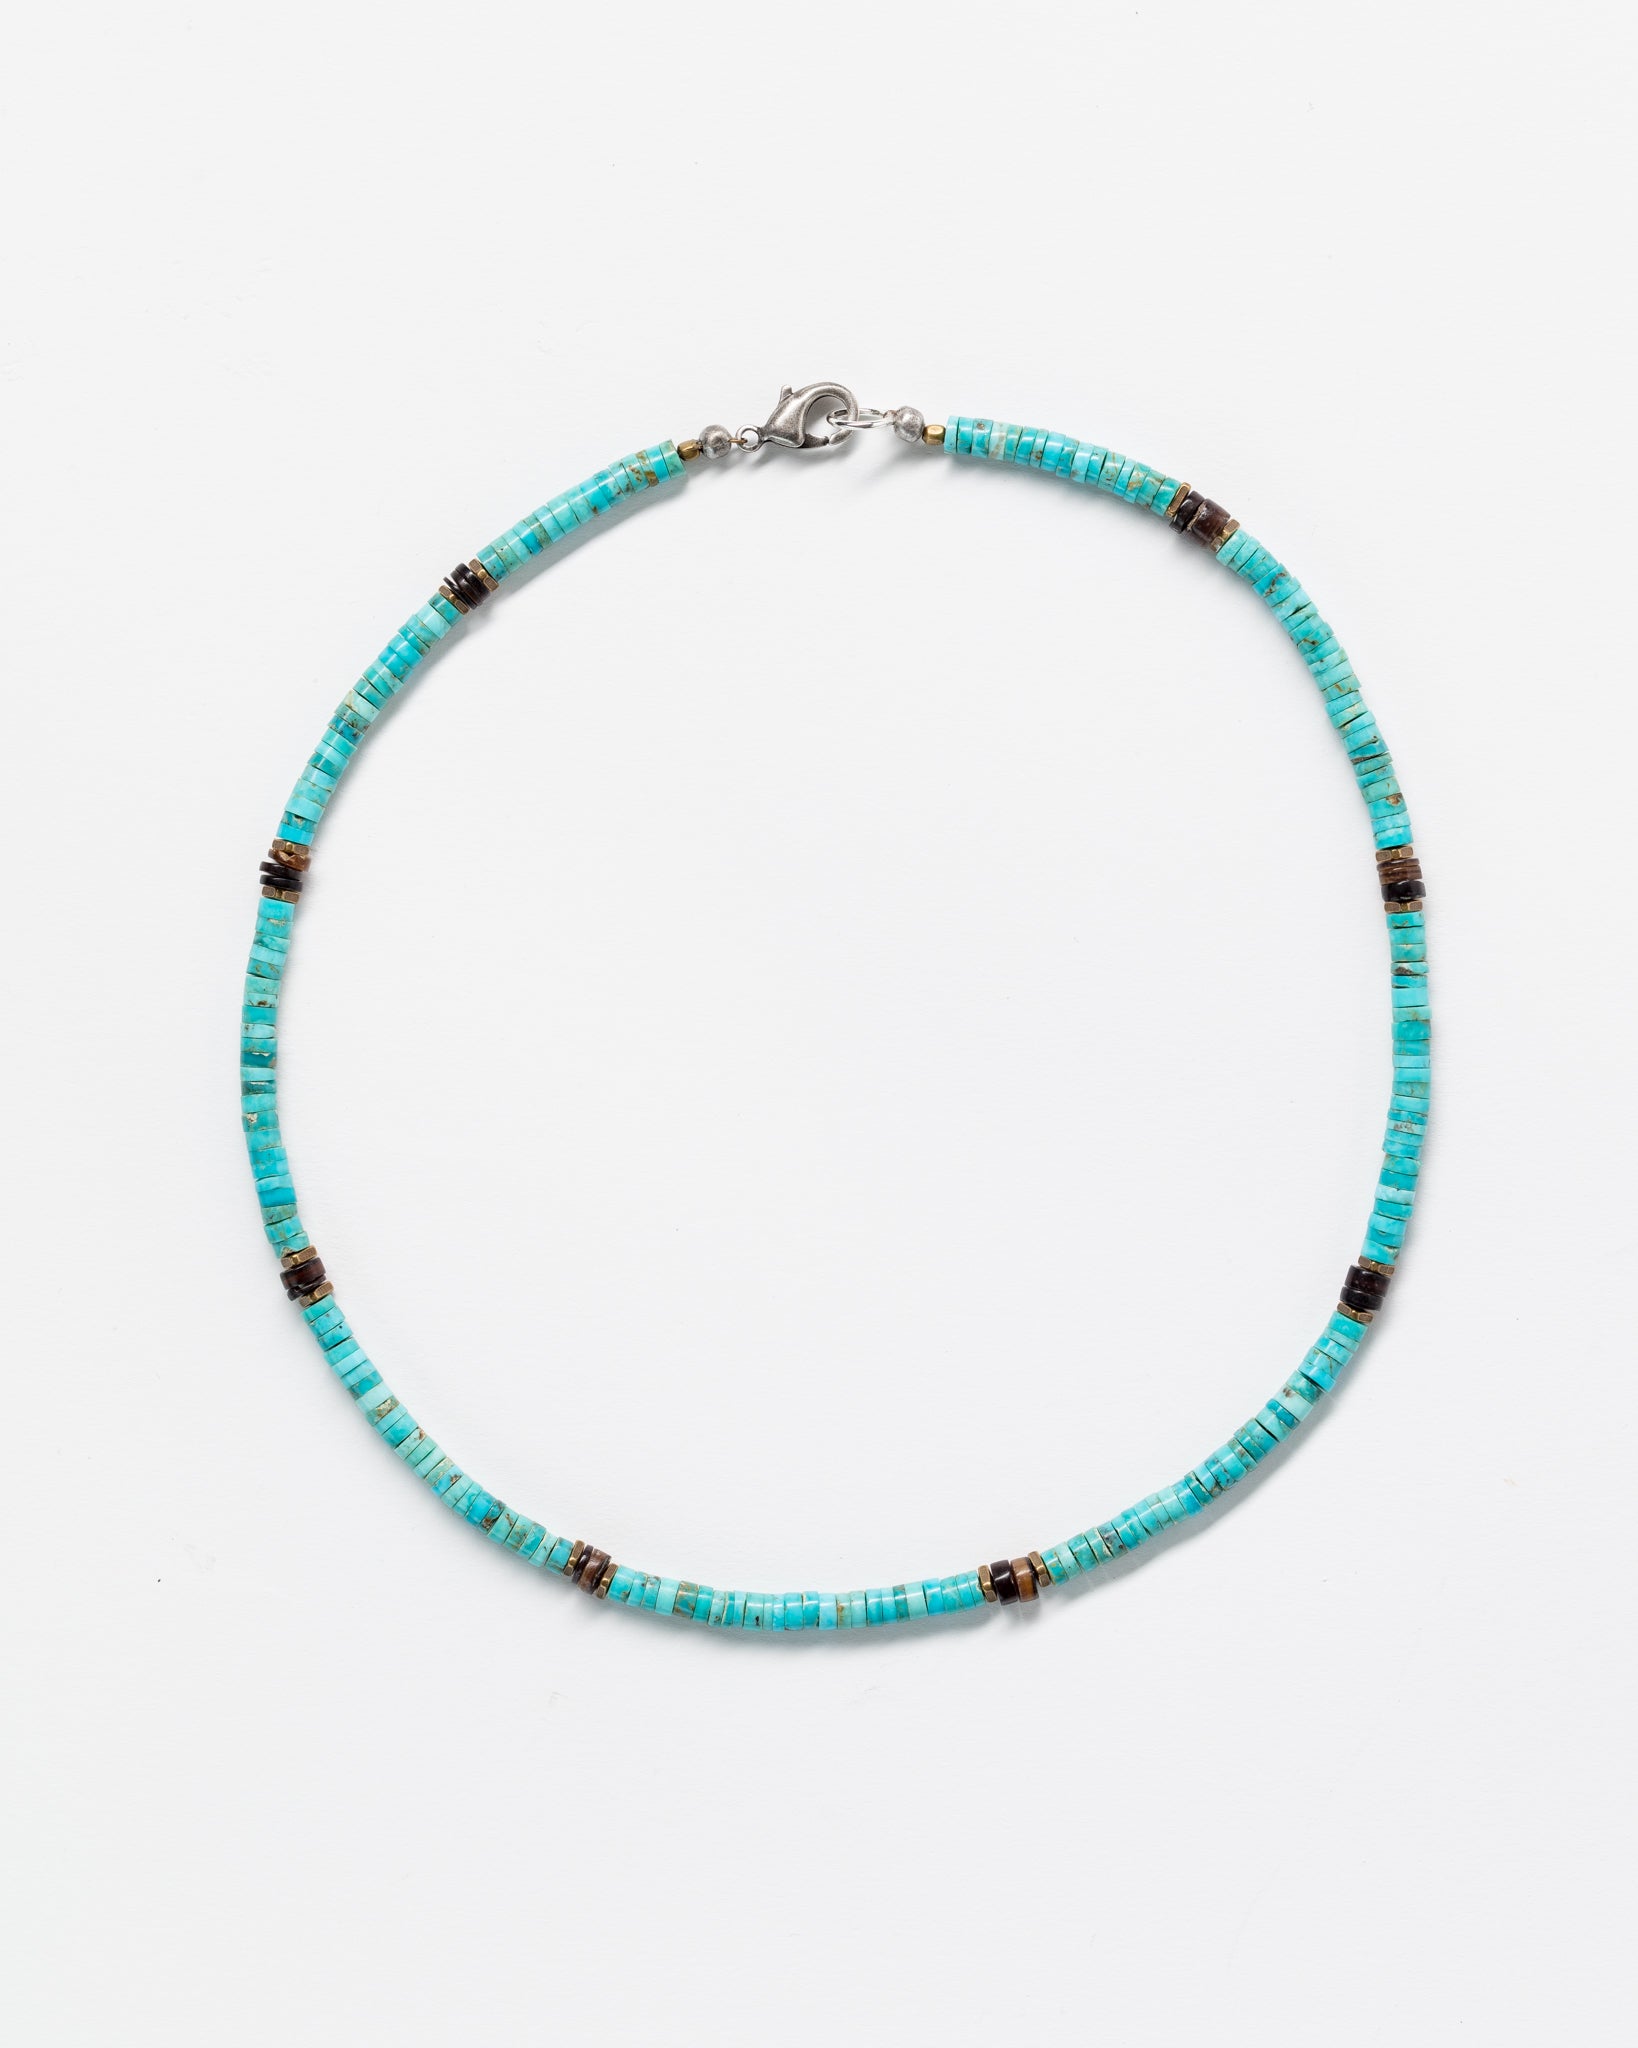 A Designs By Raya turquoise necklace with black and metallic accents, displayed against a white background. The necklace features a simple clasp and embodies Arizona style.